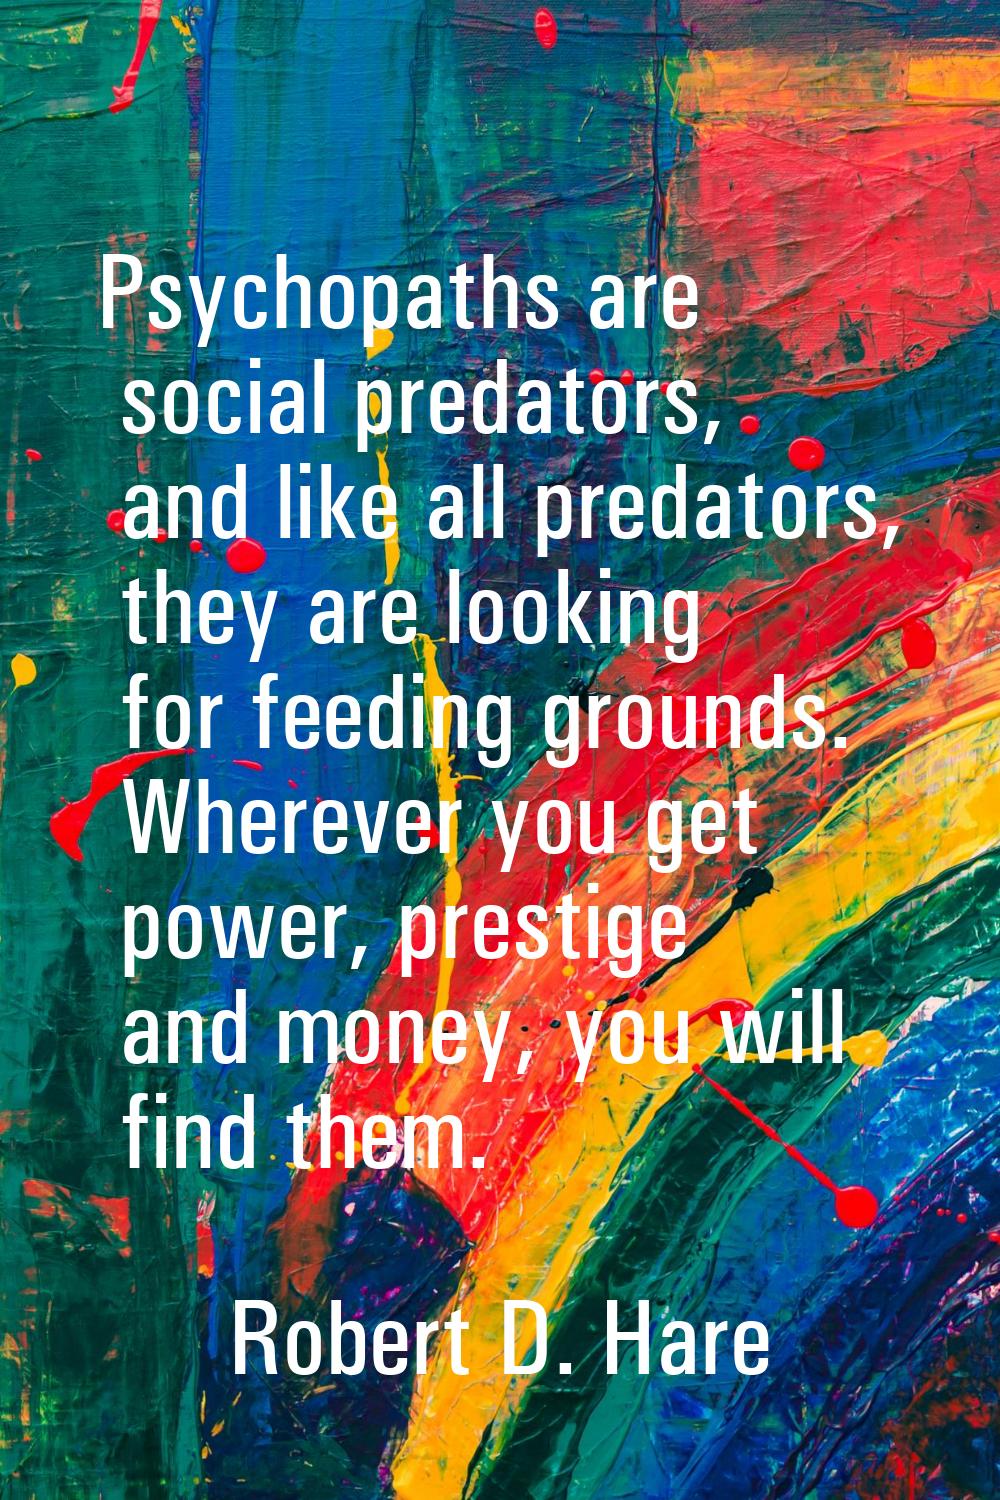 Psychopaths are social predators, and like all predators, they are looking for feeding grounds. Whe